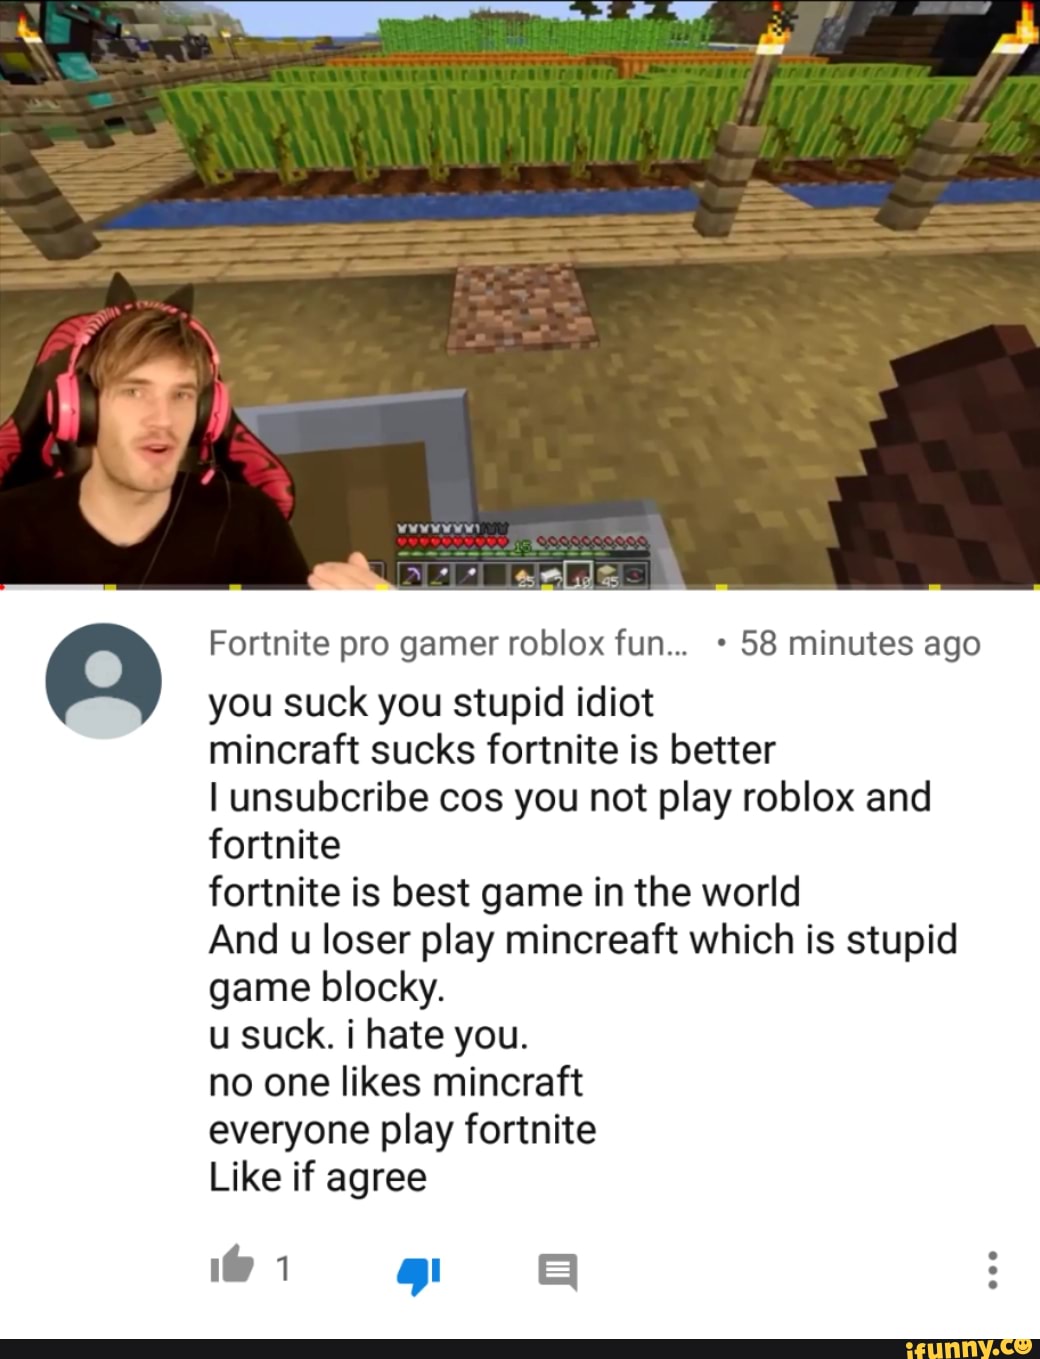 Fortnite Pro Gamer Roblox Fun 58 Minutes Ago You Suck You Stupid Idiot Mincraft Sucks Fortnite Is Better I Unsubcribe Cos You Not Play Roblox And Fortnite Fortnite Is Best Game - fortnite but it sucks roblox